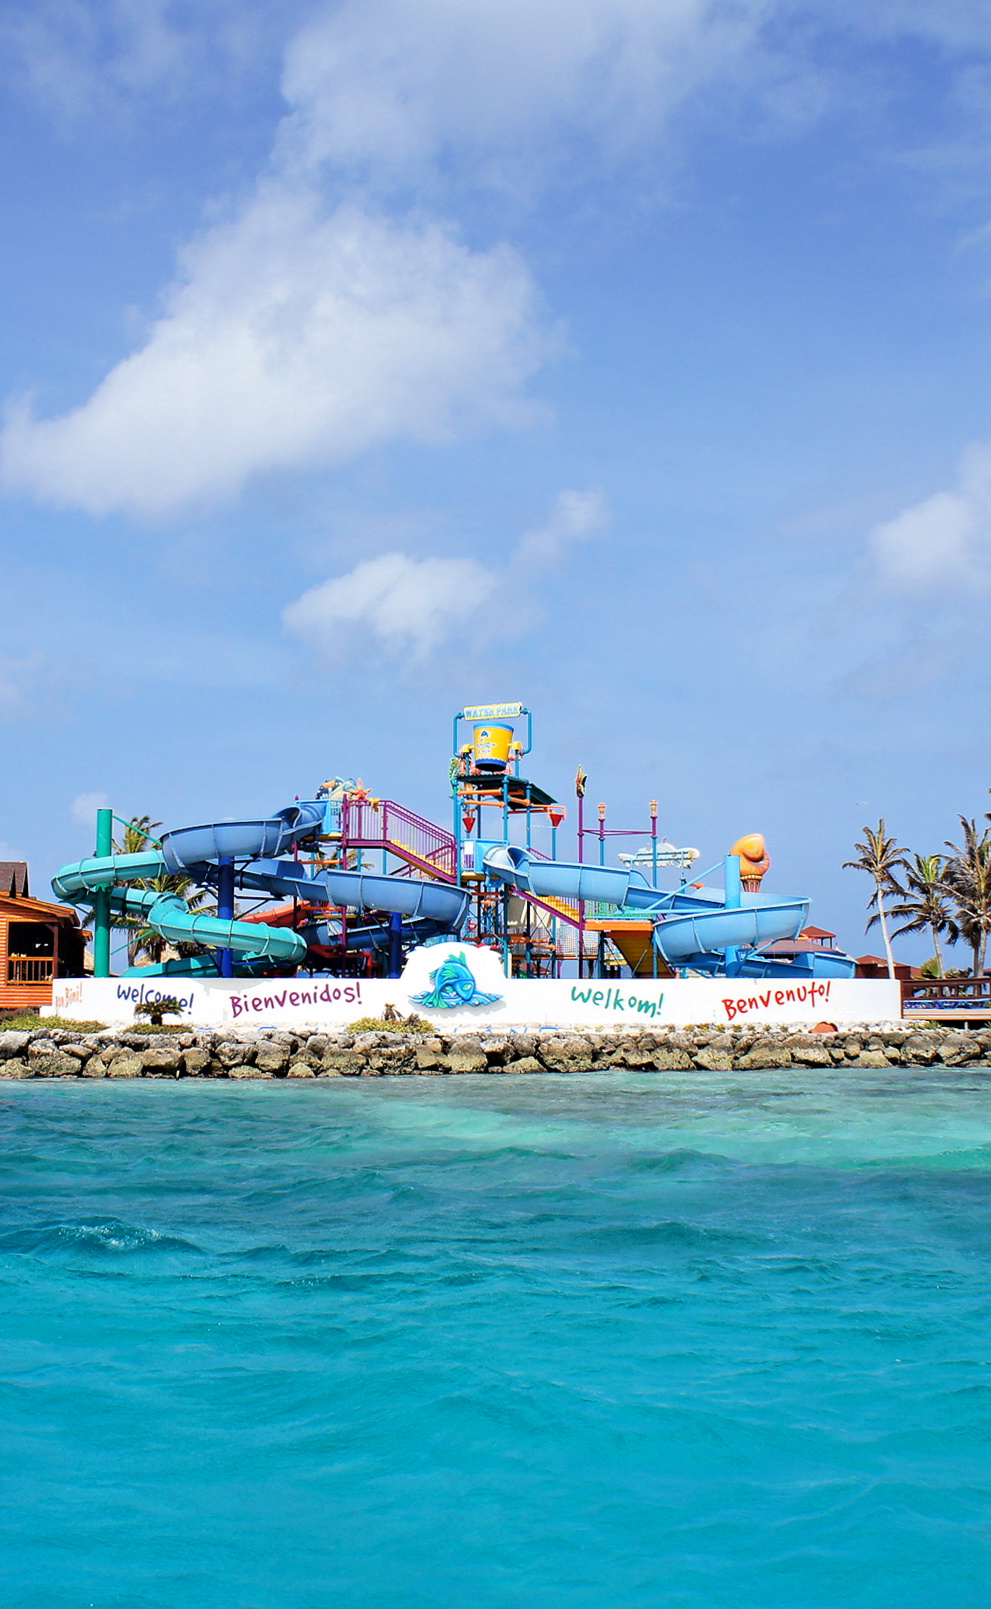 Top 5 Things to do with Kids in Aruba